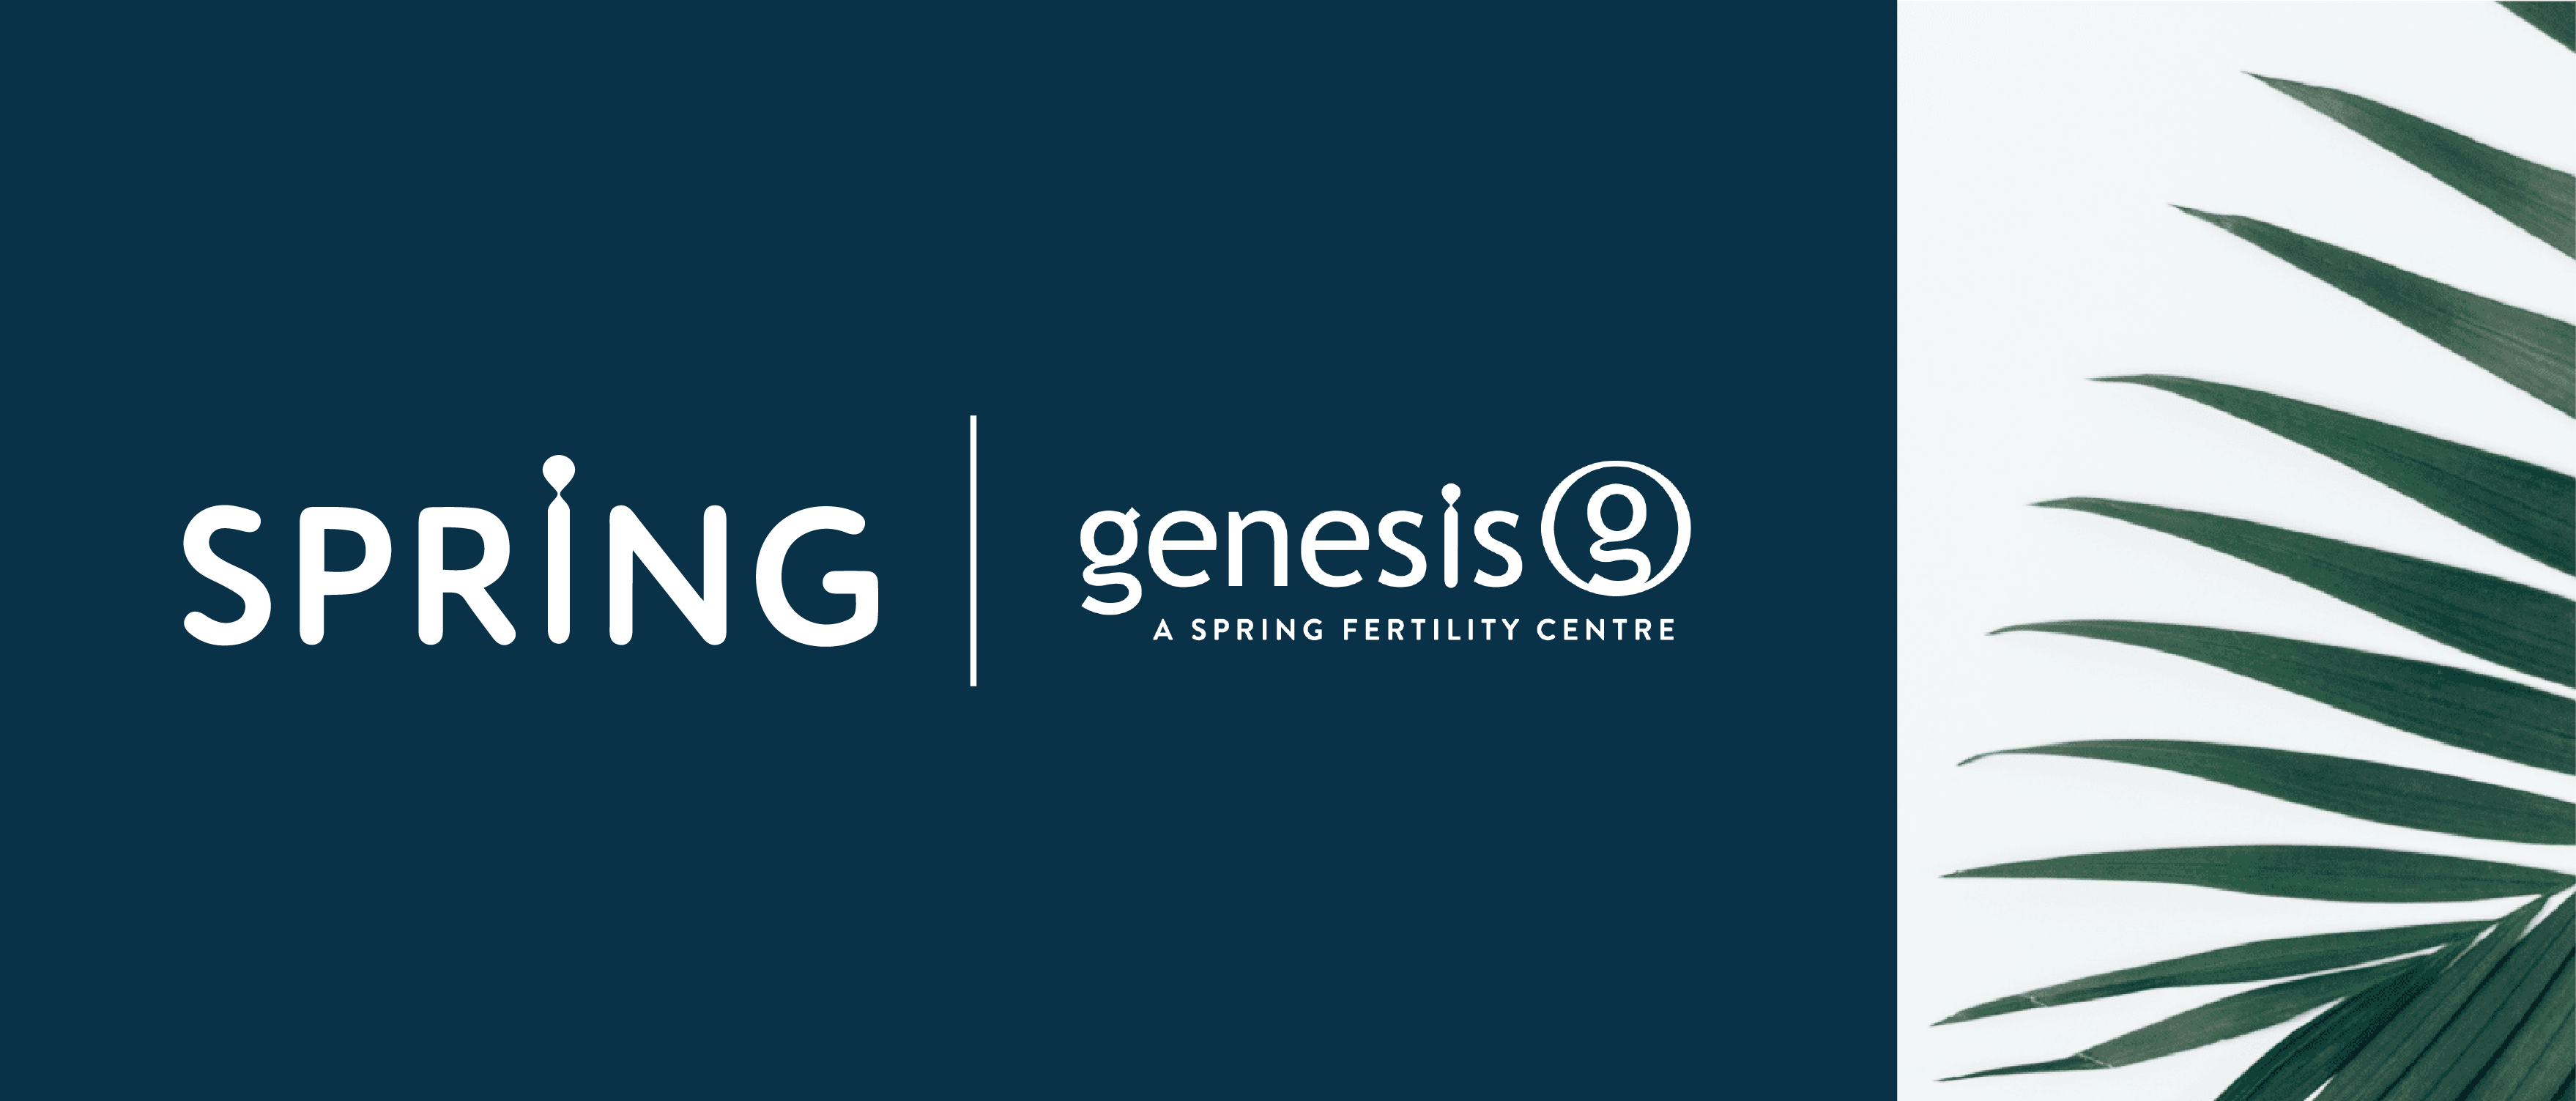 Genesis Fertility to Become First Canadian Clinic to join Premier United States IVF Network, Spring Fertility